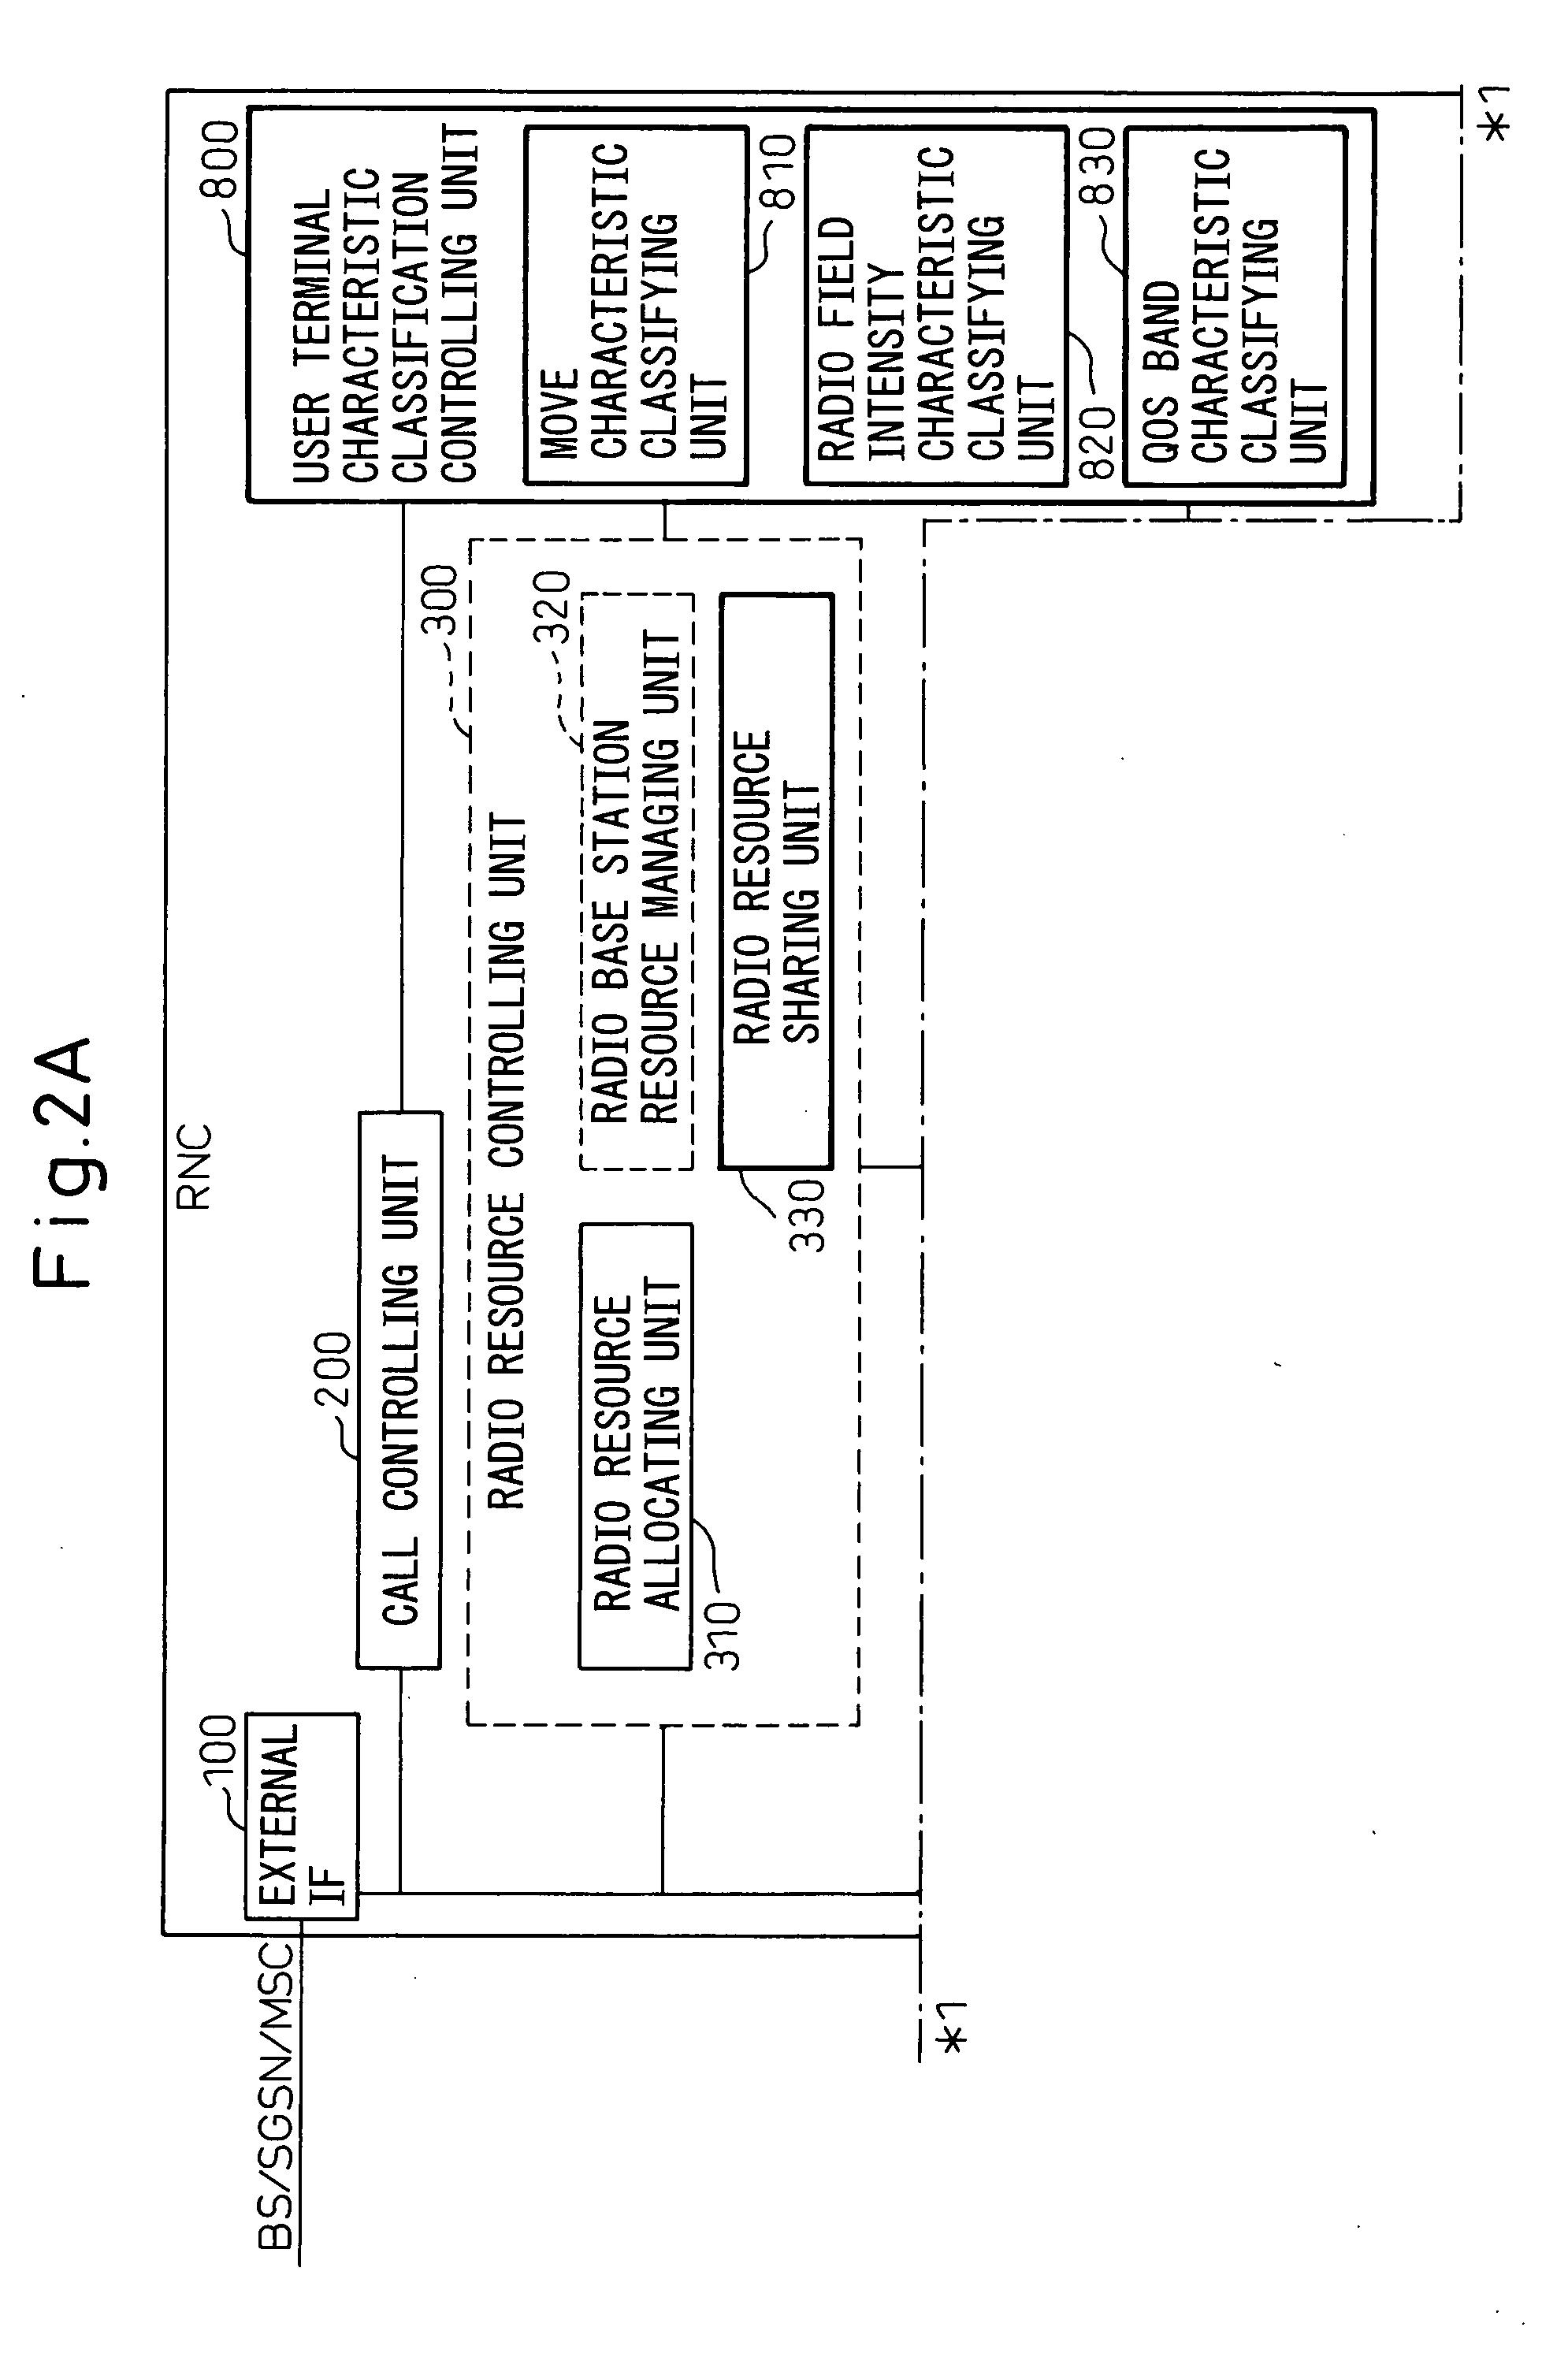 Method of controlling sharing of radio resources in mobile communication system